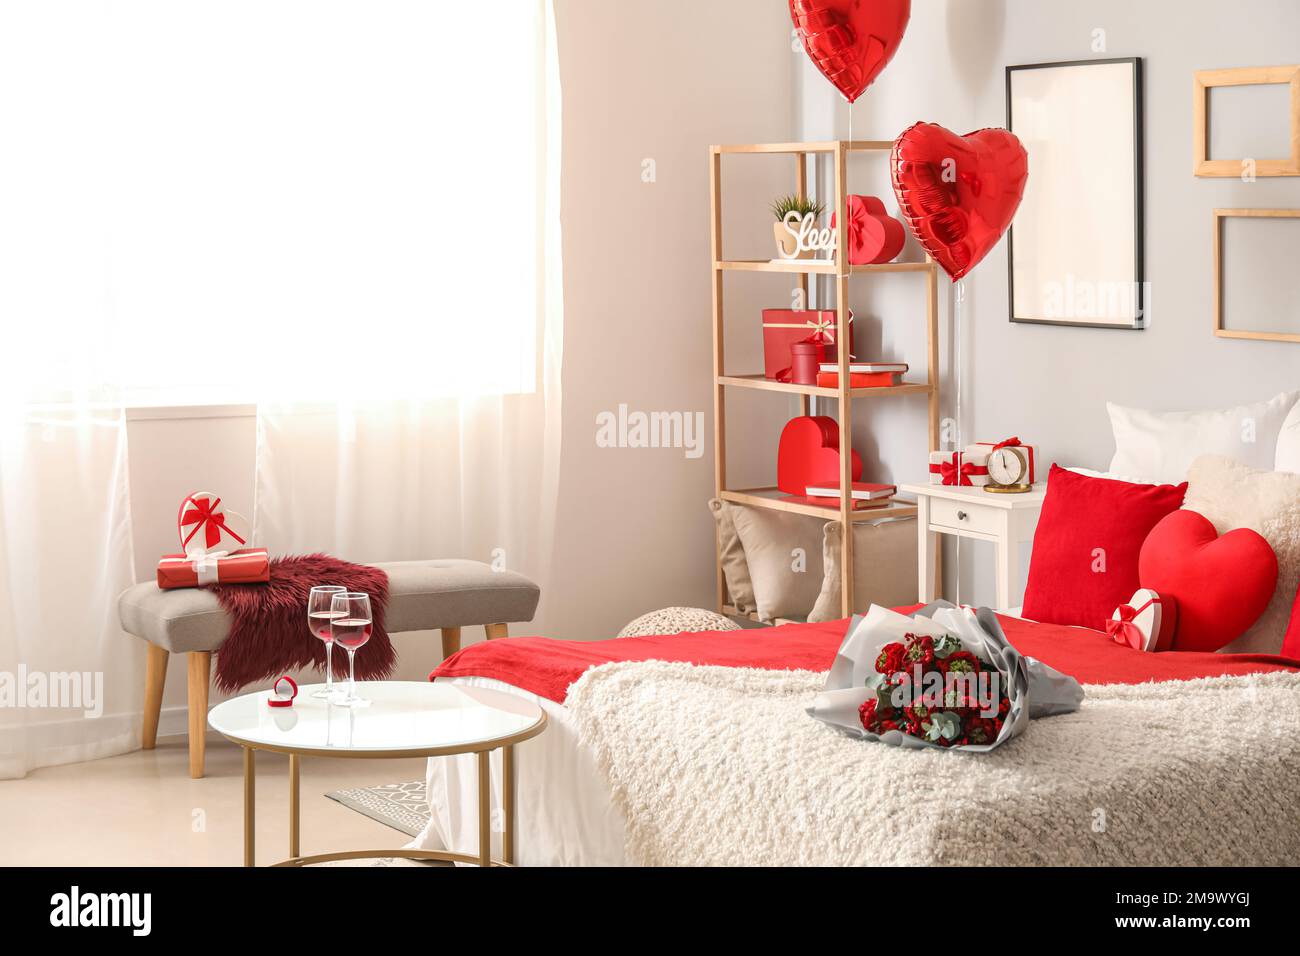 Interior of bedroom decorated for Valentine\'s Day with flowers and ...